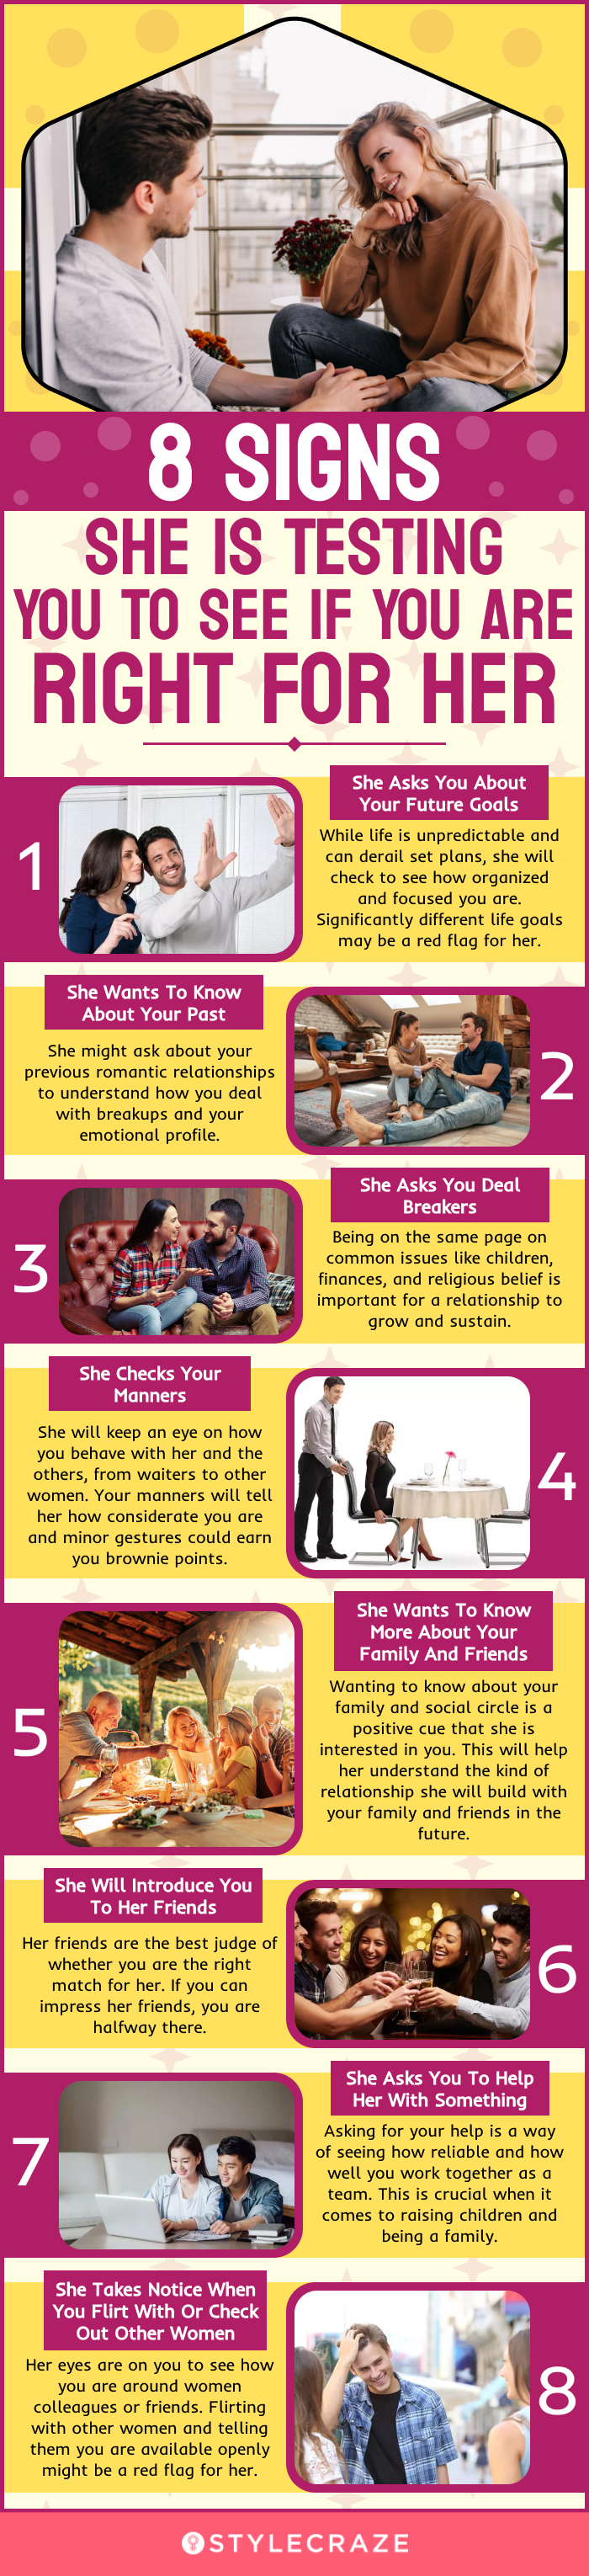 8 signs she is testing you to see if you are right for her (infographic)